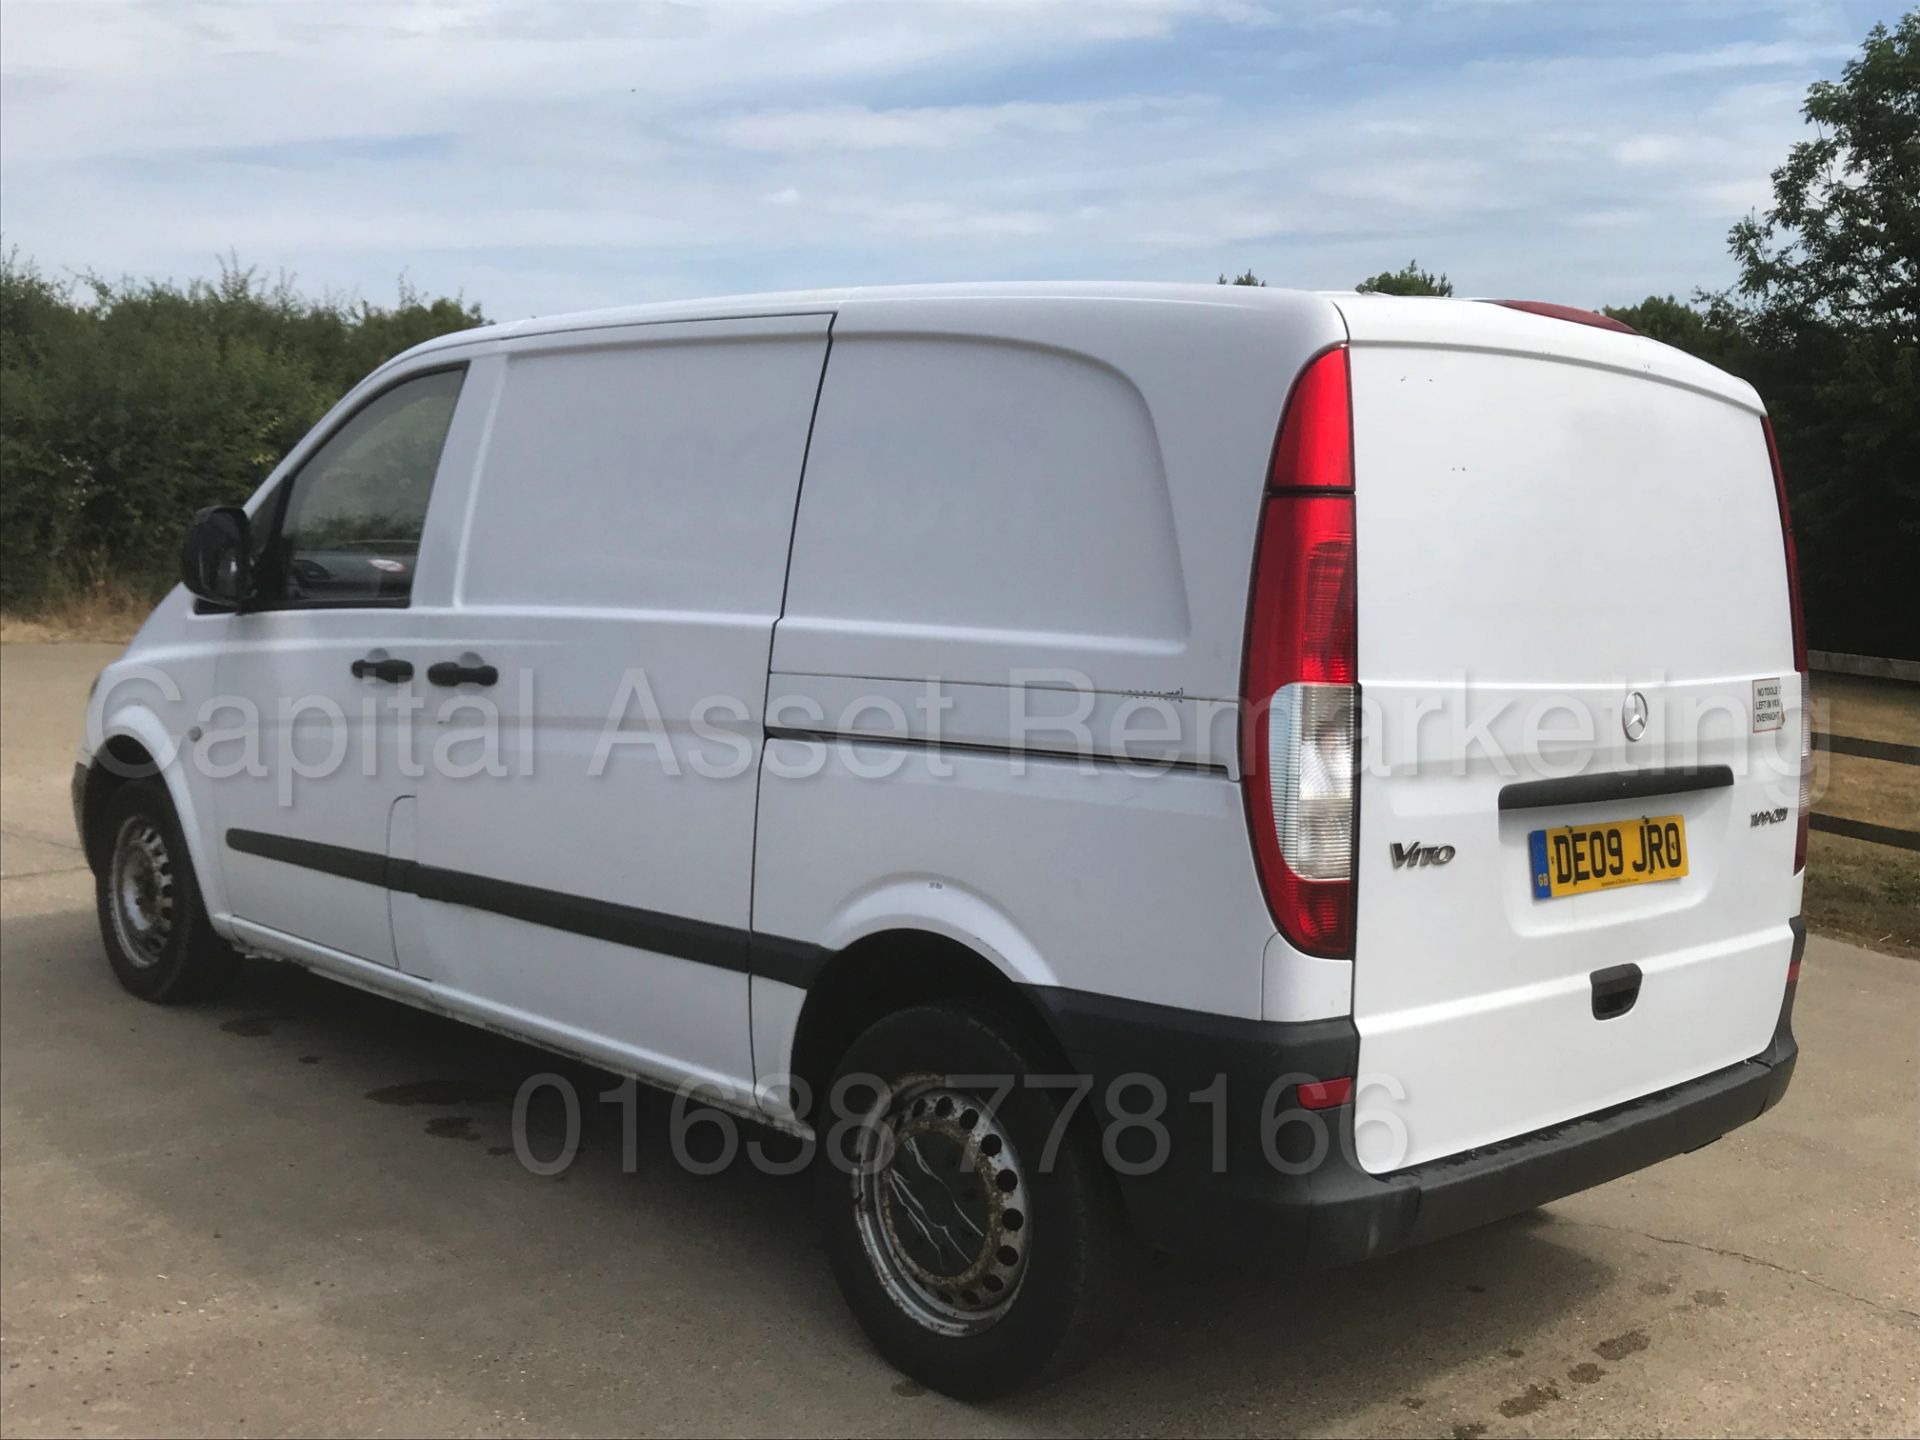 (On Sale) MERCEDES-BENZ VITO 109 CDI 'COMPACT' *PANEL VAN* (2009) '2.1 CDI - 6 SPEED' - Image 7 of 30